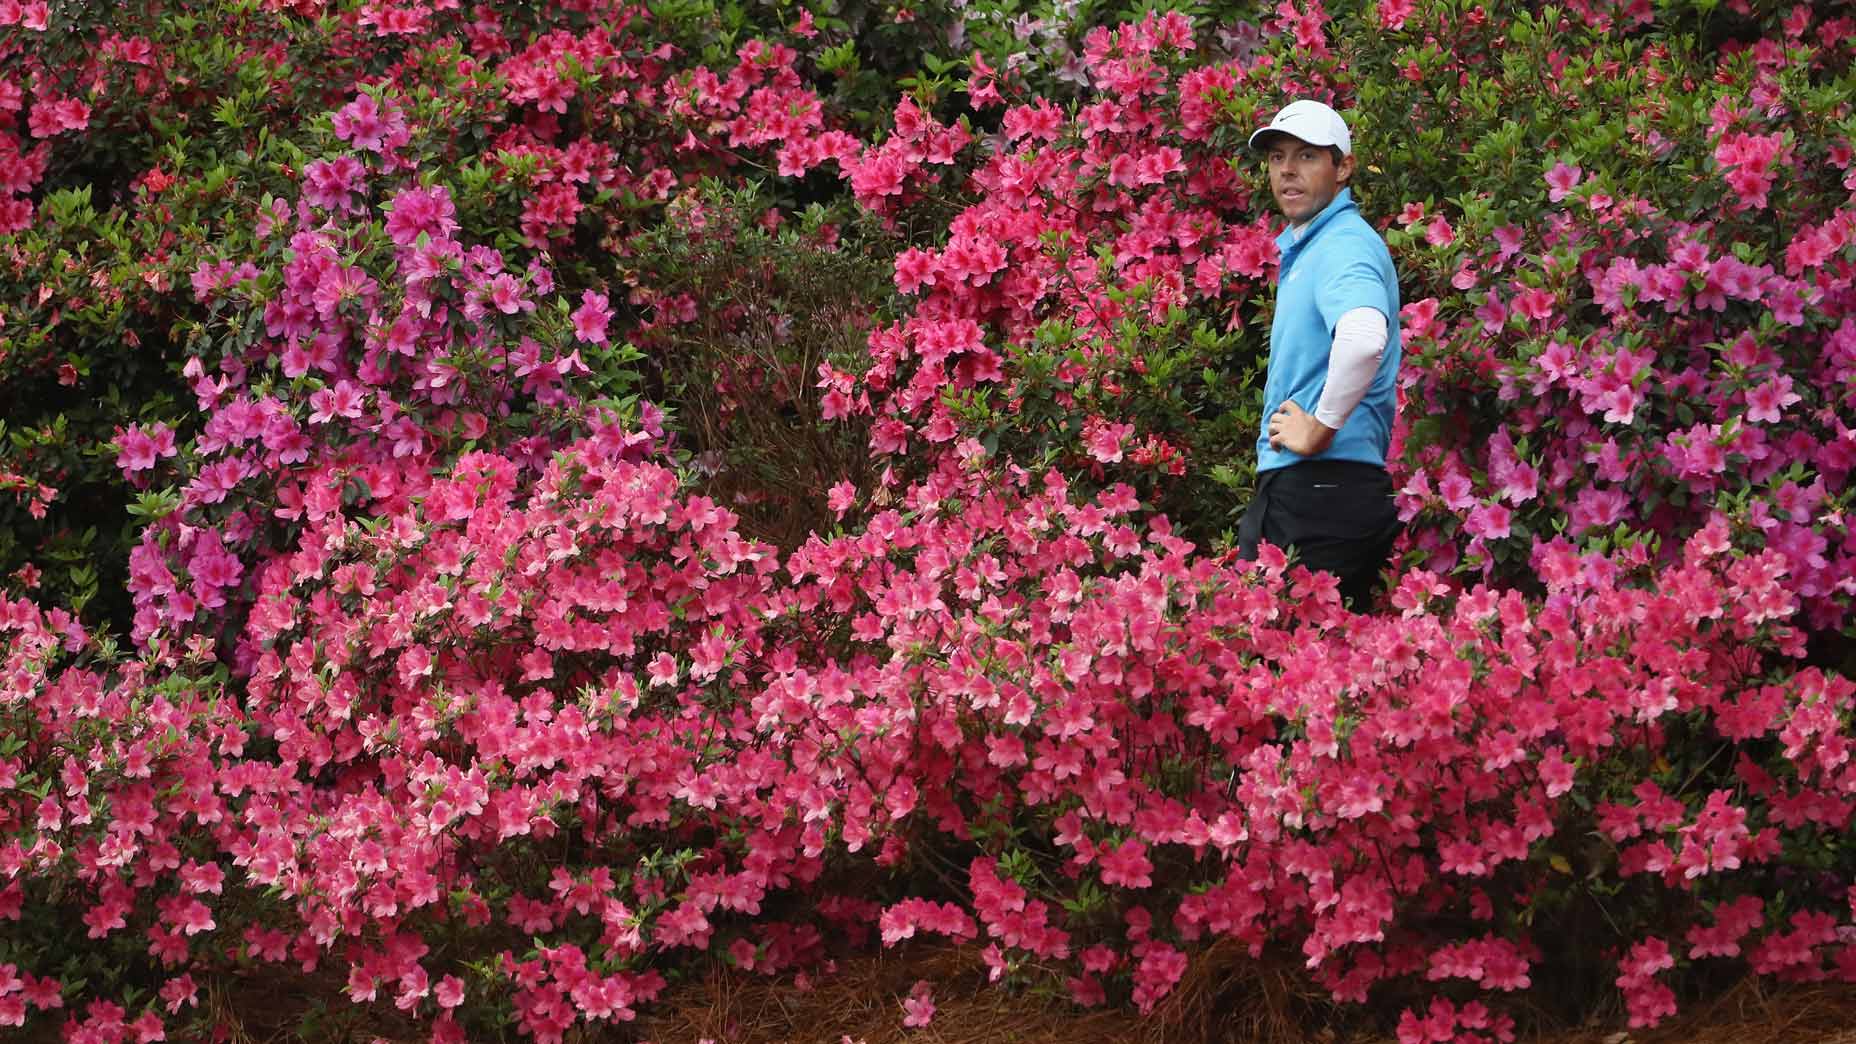 Rory McIlroy of Northern Ireland prepares to play a shot out of the flowers on the 13th hole during the third round of the 2018 Masters Tournament